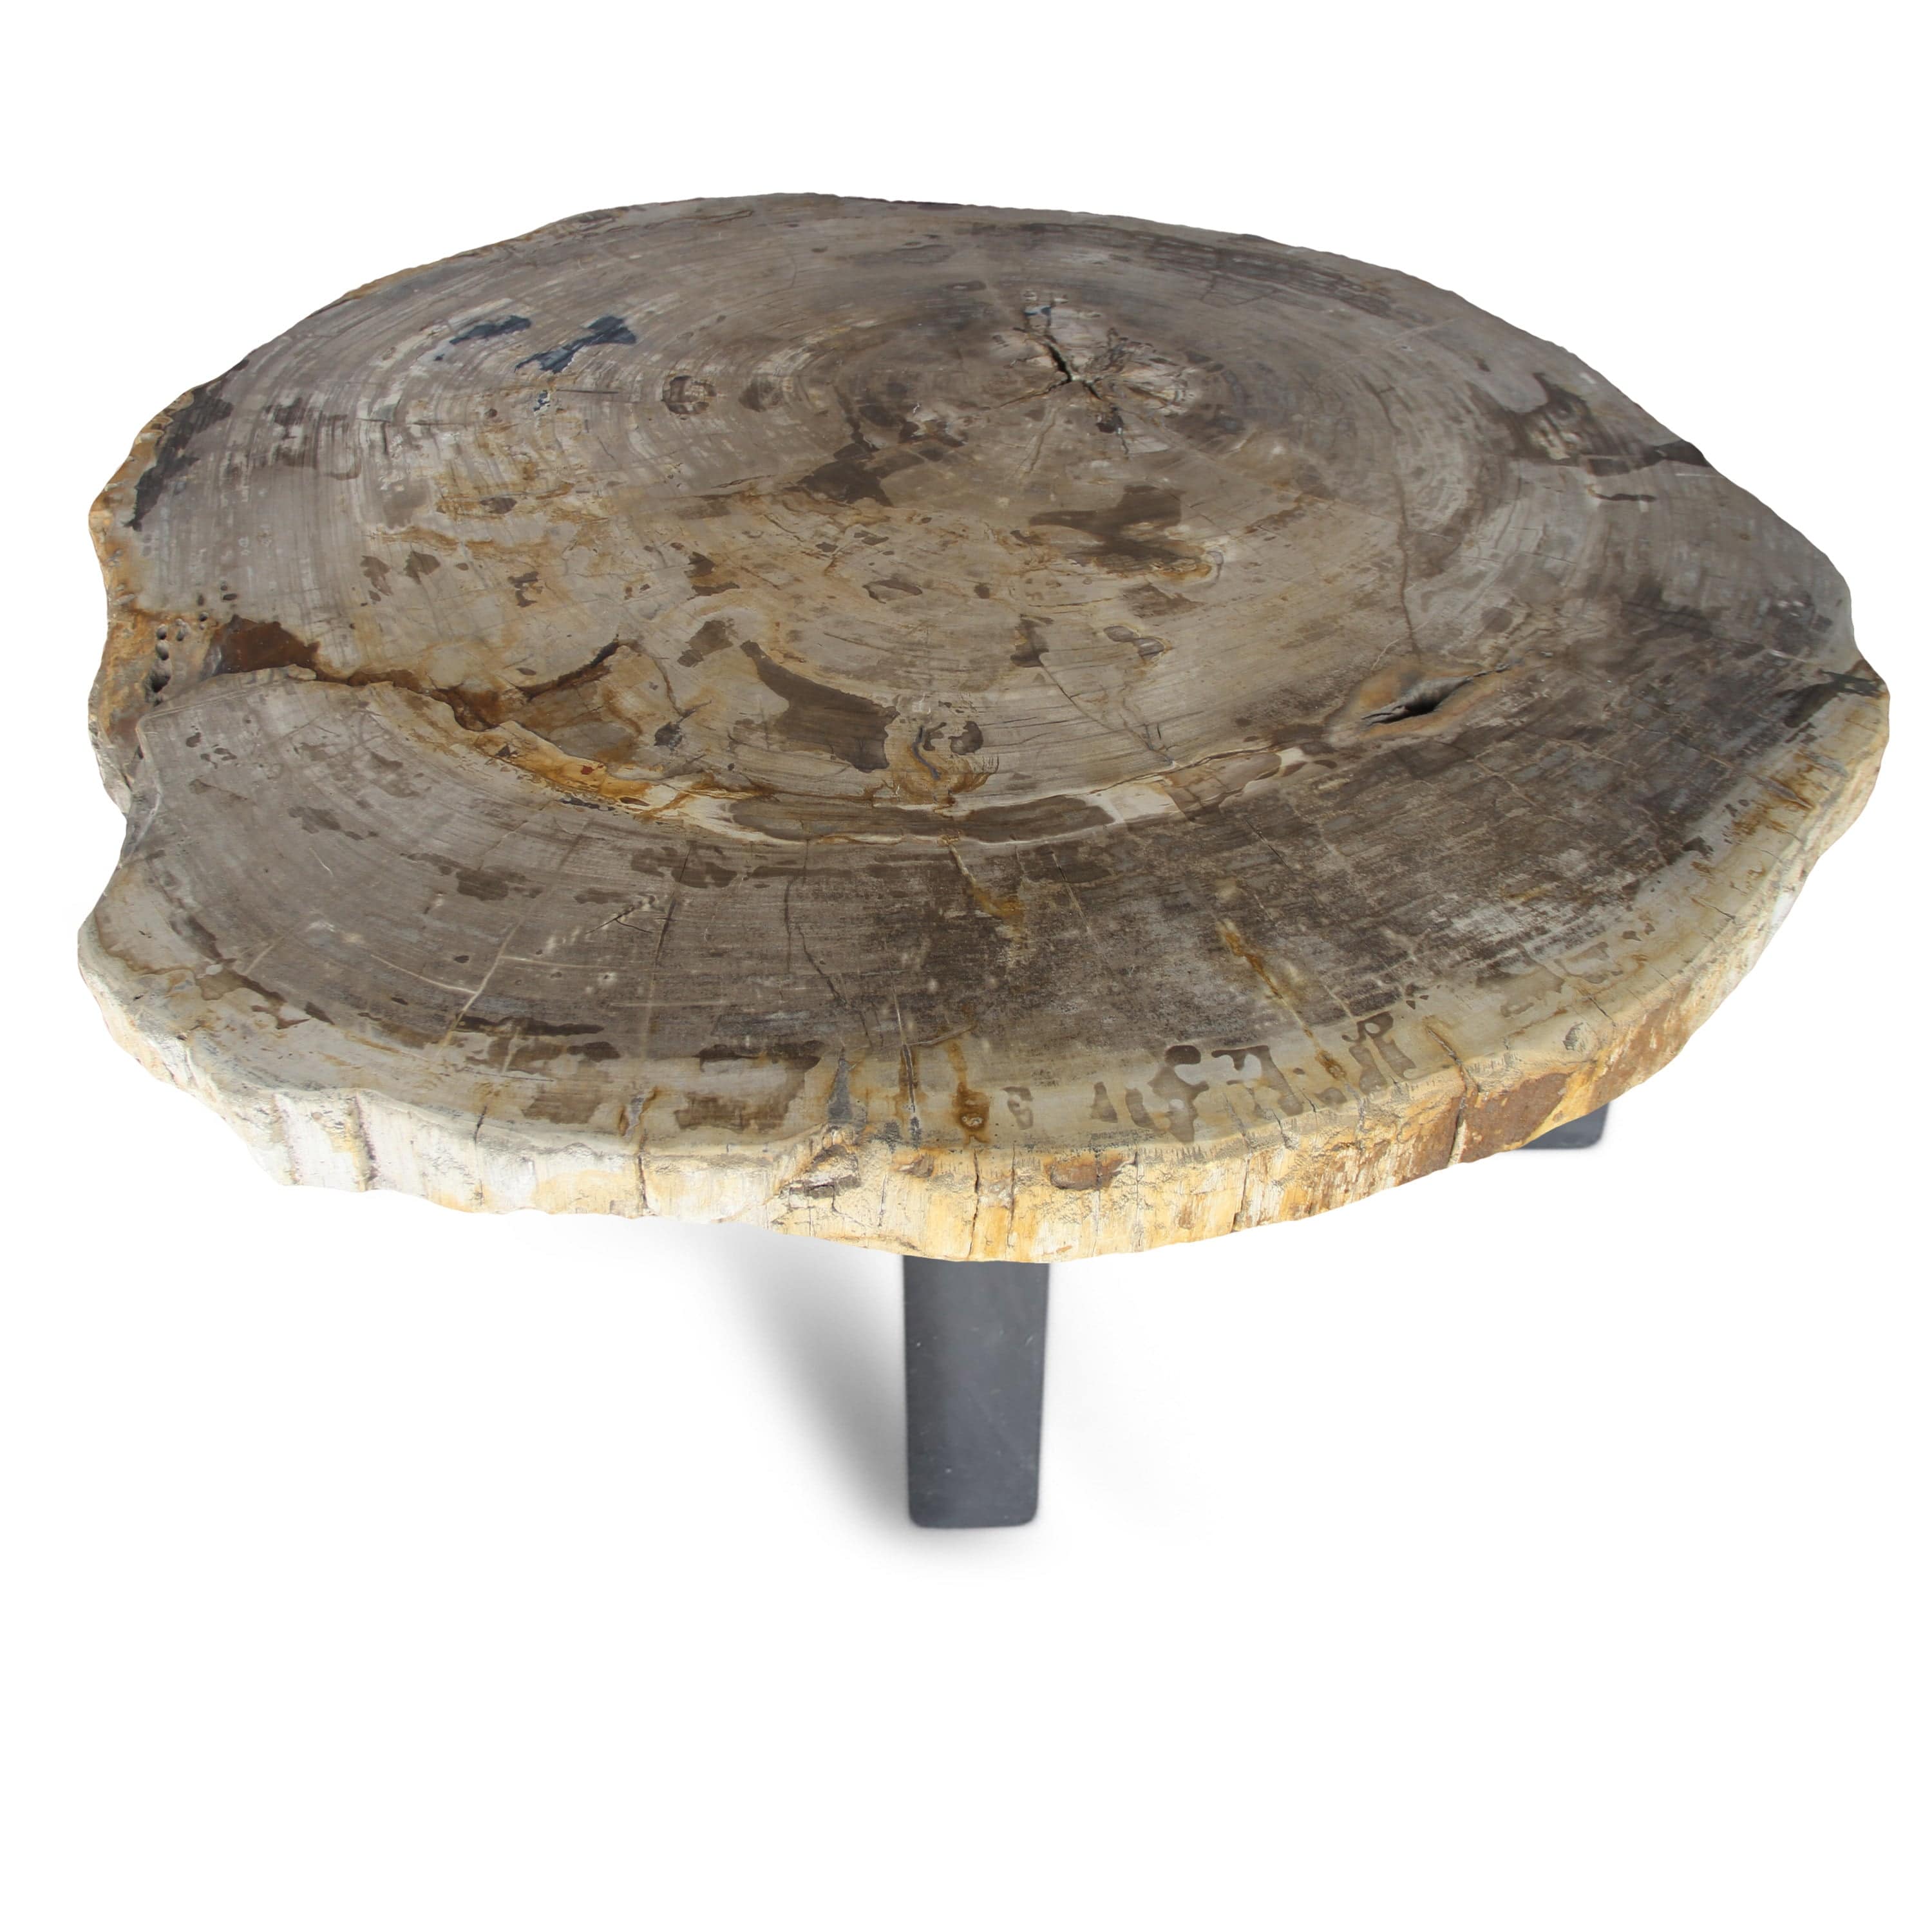 Kalifano Petrified Wood Petrified Wood Round Slab Coffee Table from Indonesia - 45" / 381 lbs PWT14000.002